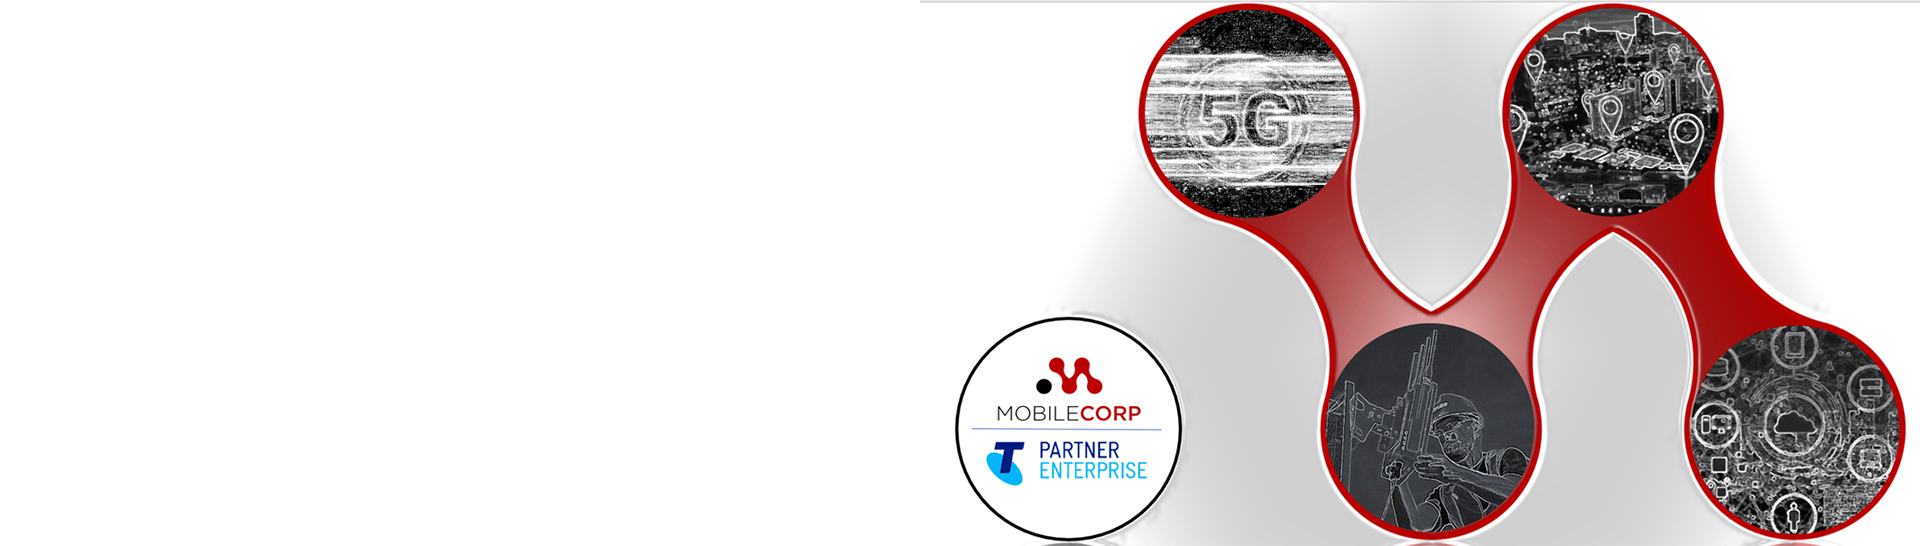 MobileCorp selected as Telstra Partner for 5G wireless resized